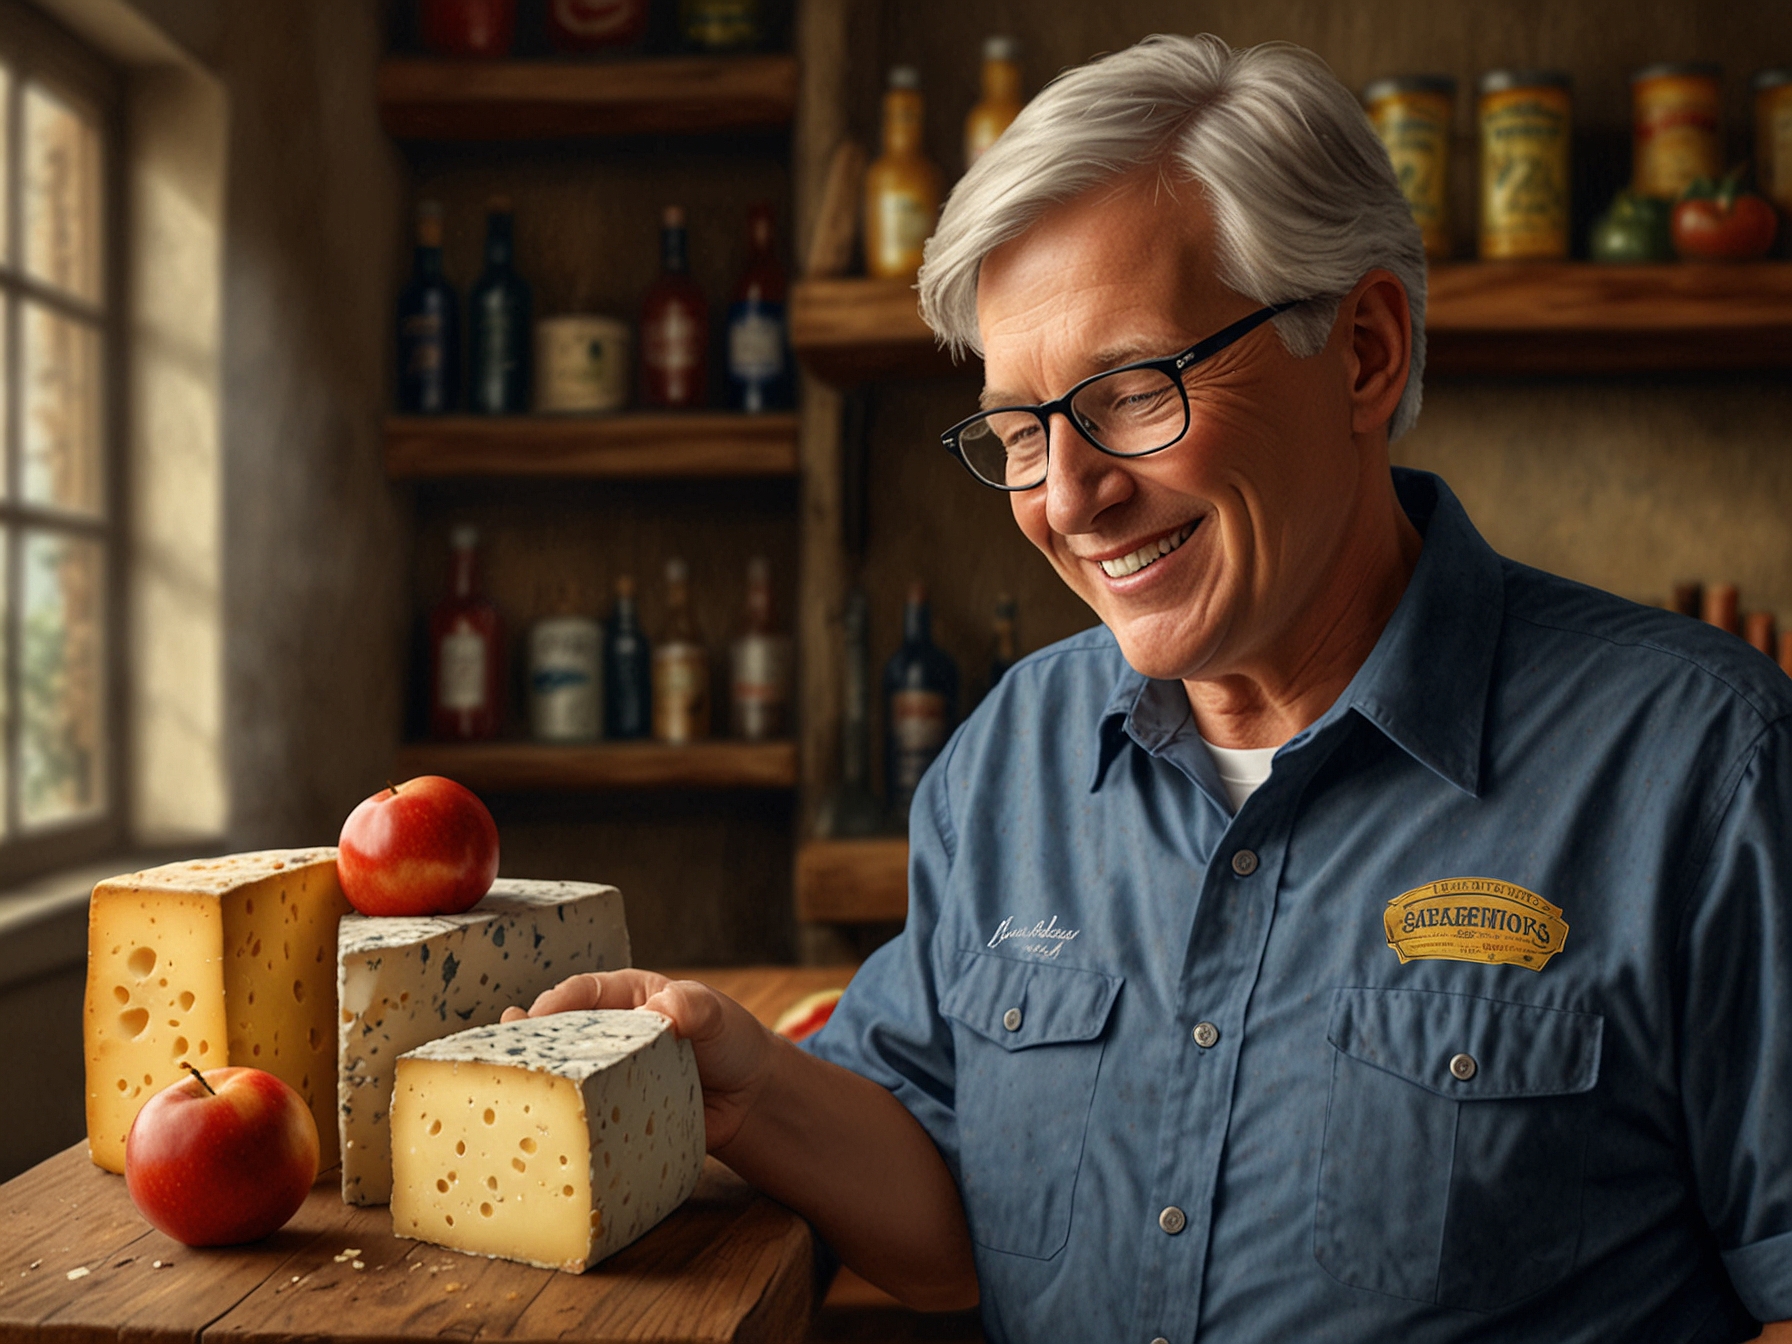 A tribute to retiring executives Mike McEvoy and Kristi Jankowski, showing their impactful contributions to Sargento's operations and innovation in the cheese industry over the past decades.